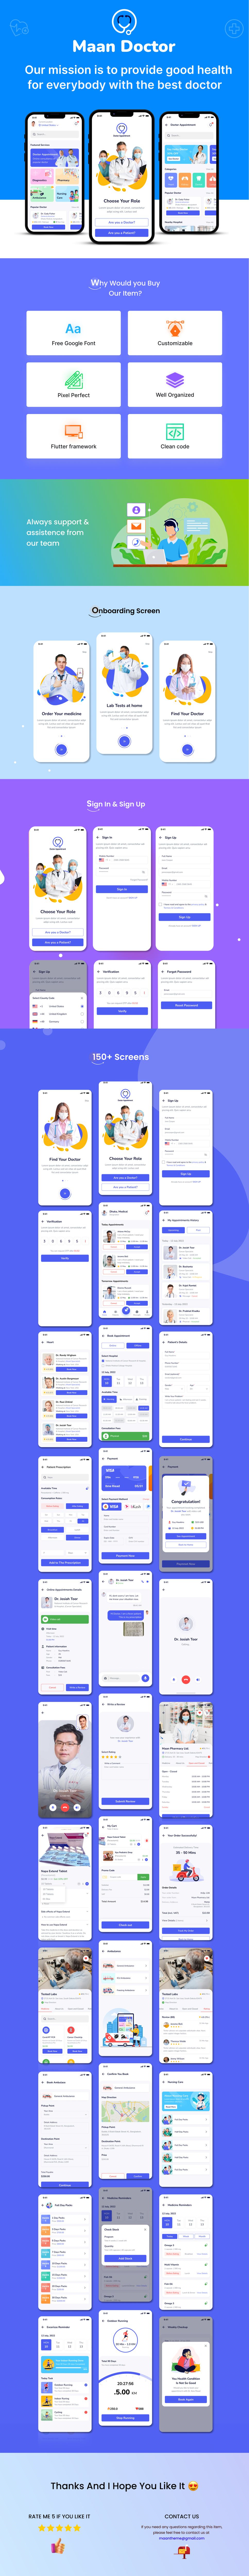 Maan Doctor- Online Doctor Appointment Booking Flutter App UI Kit - 1